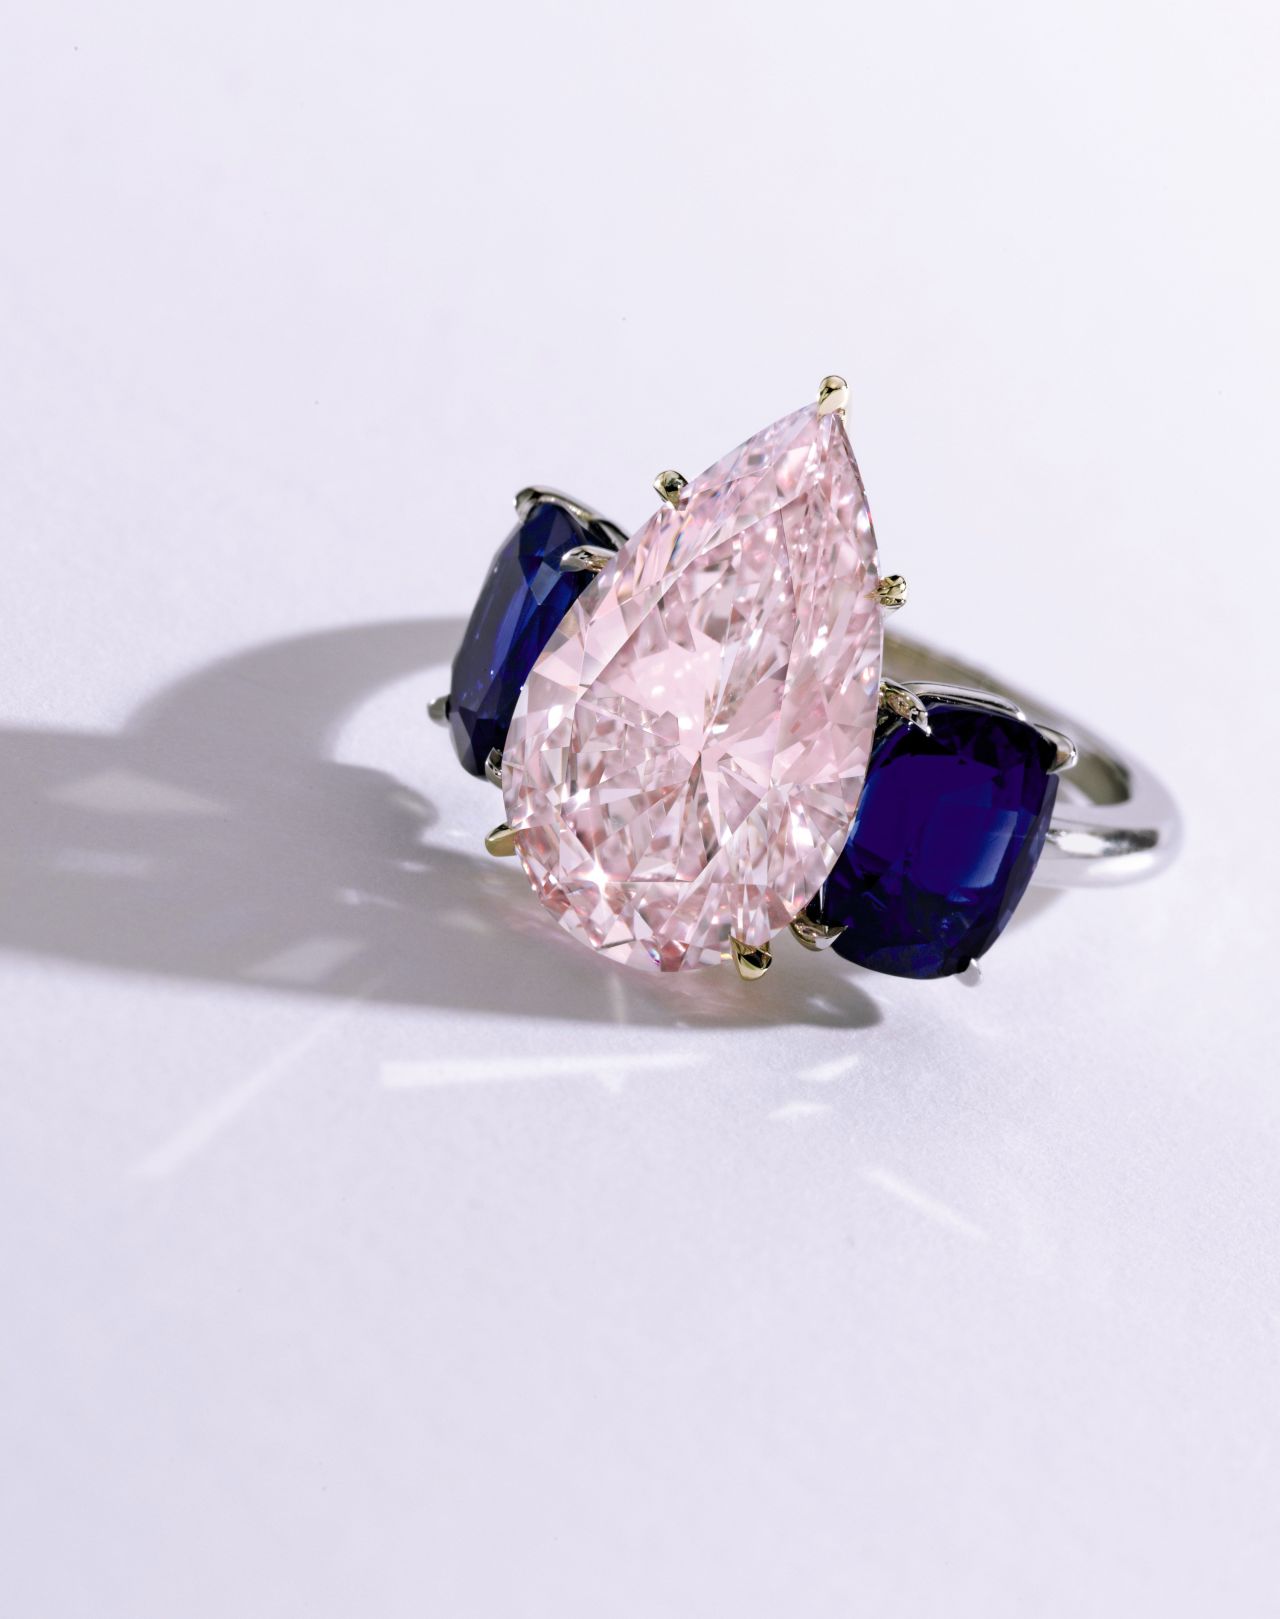 This purple-pink diamond, set between two sapphires, provides a great alternative to the classic white. It sold for $2.4 million.